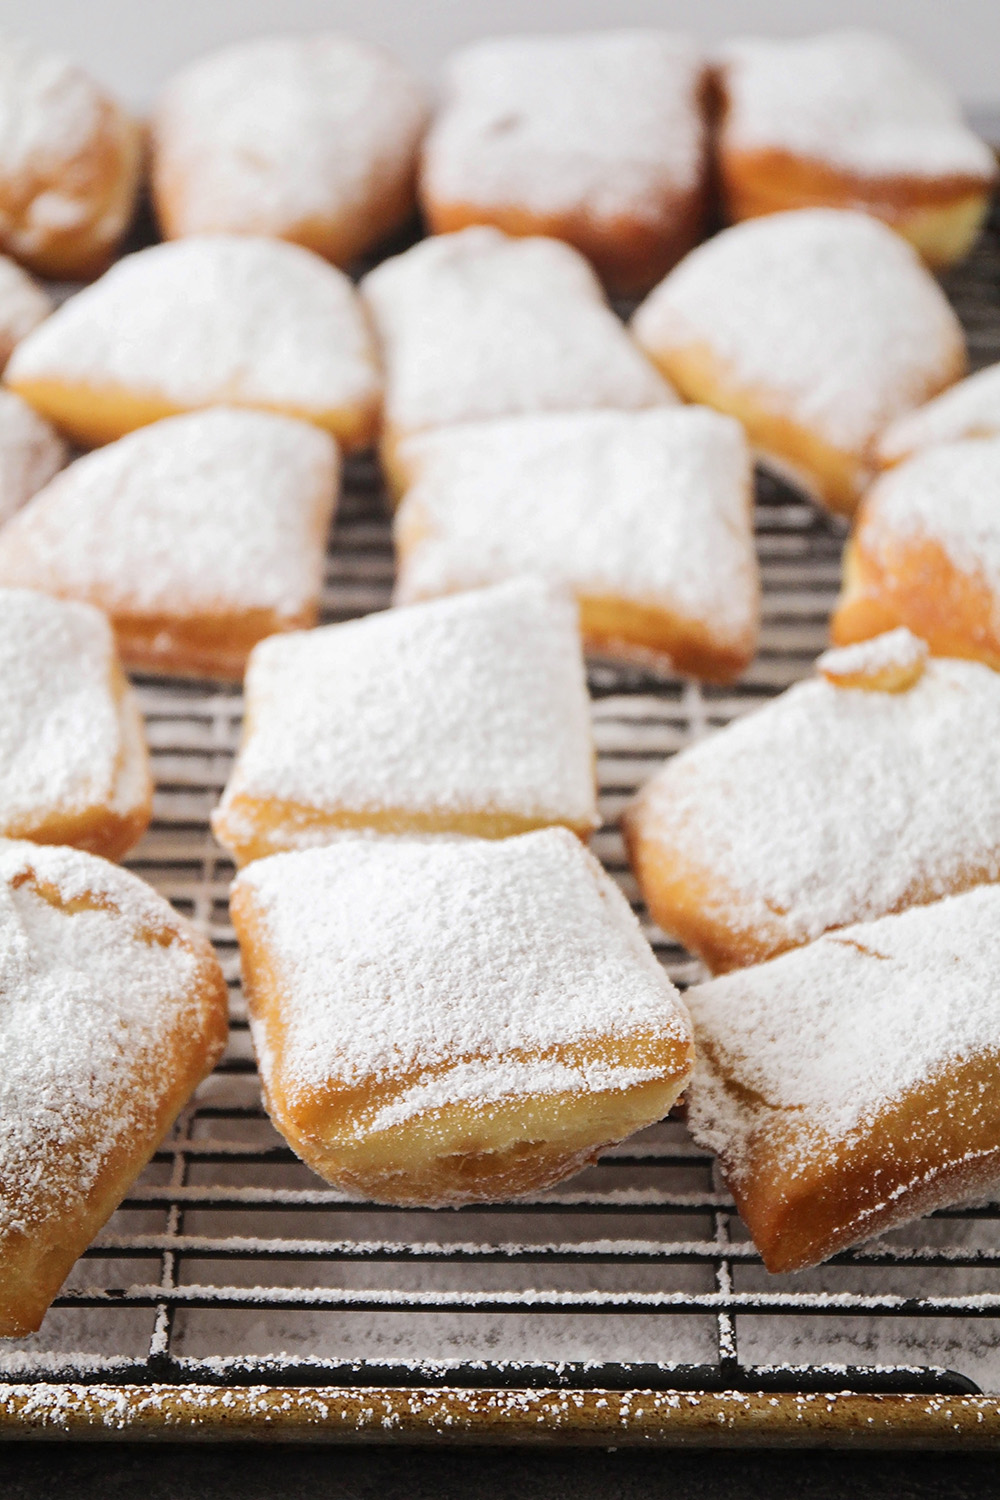 These easy homemade beignets are absolutely divine! They're light and fluffy, with the perfect amount of sweetness. So delicious and easy to make!